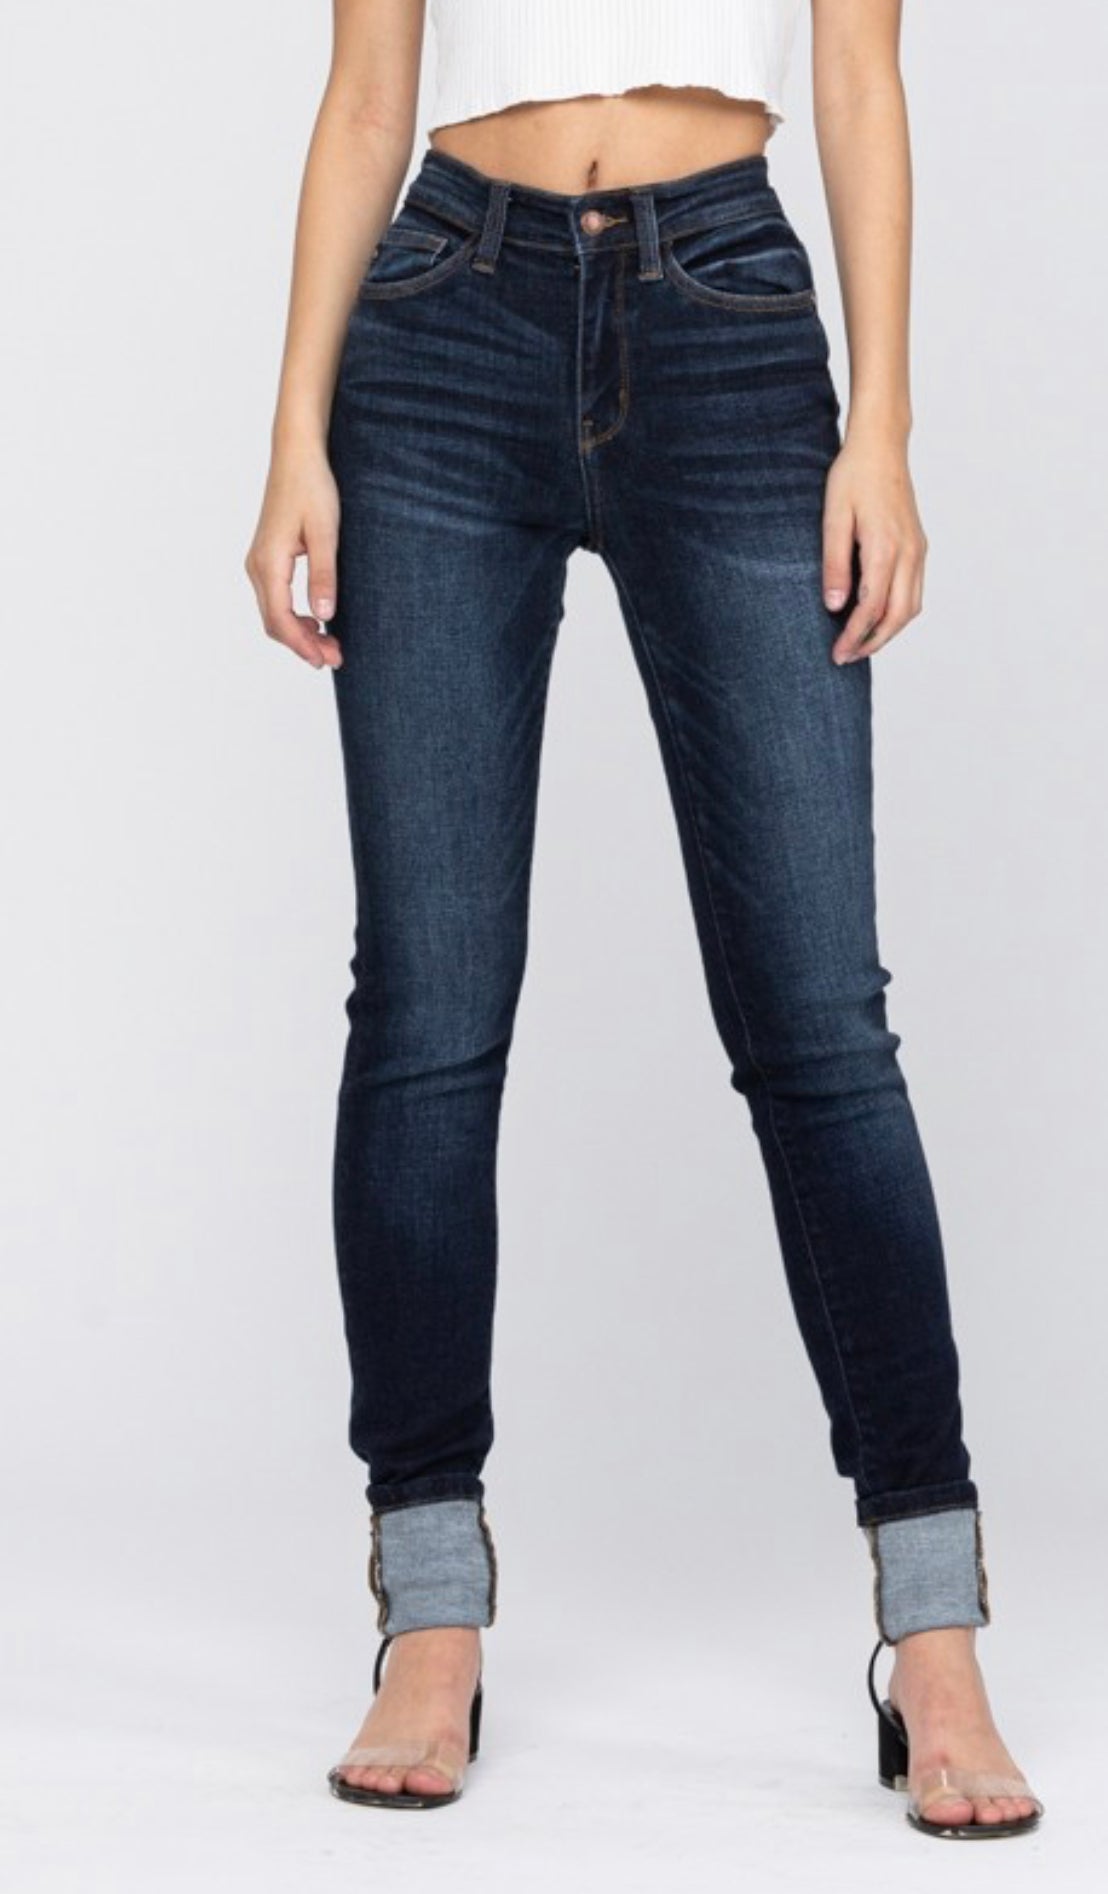 Stand Tall Judy Blue Extended Length – the Savvy Jean